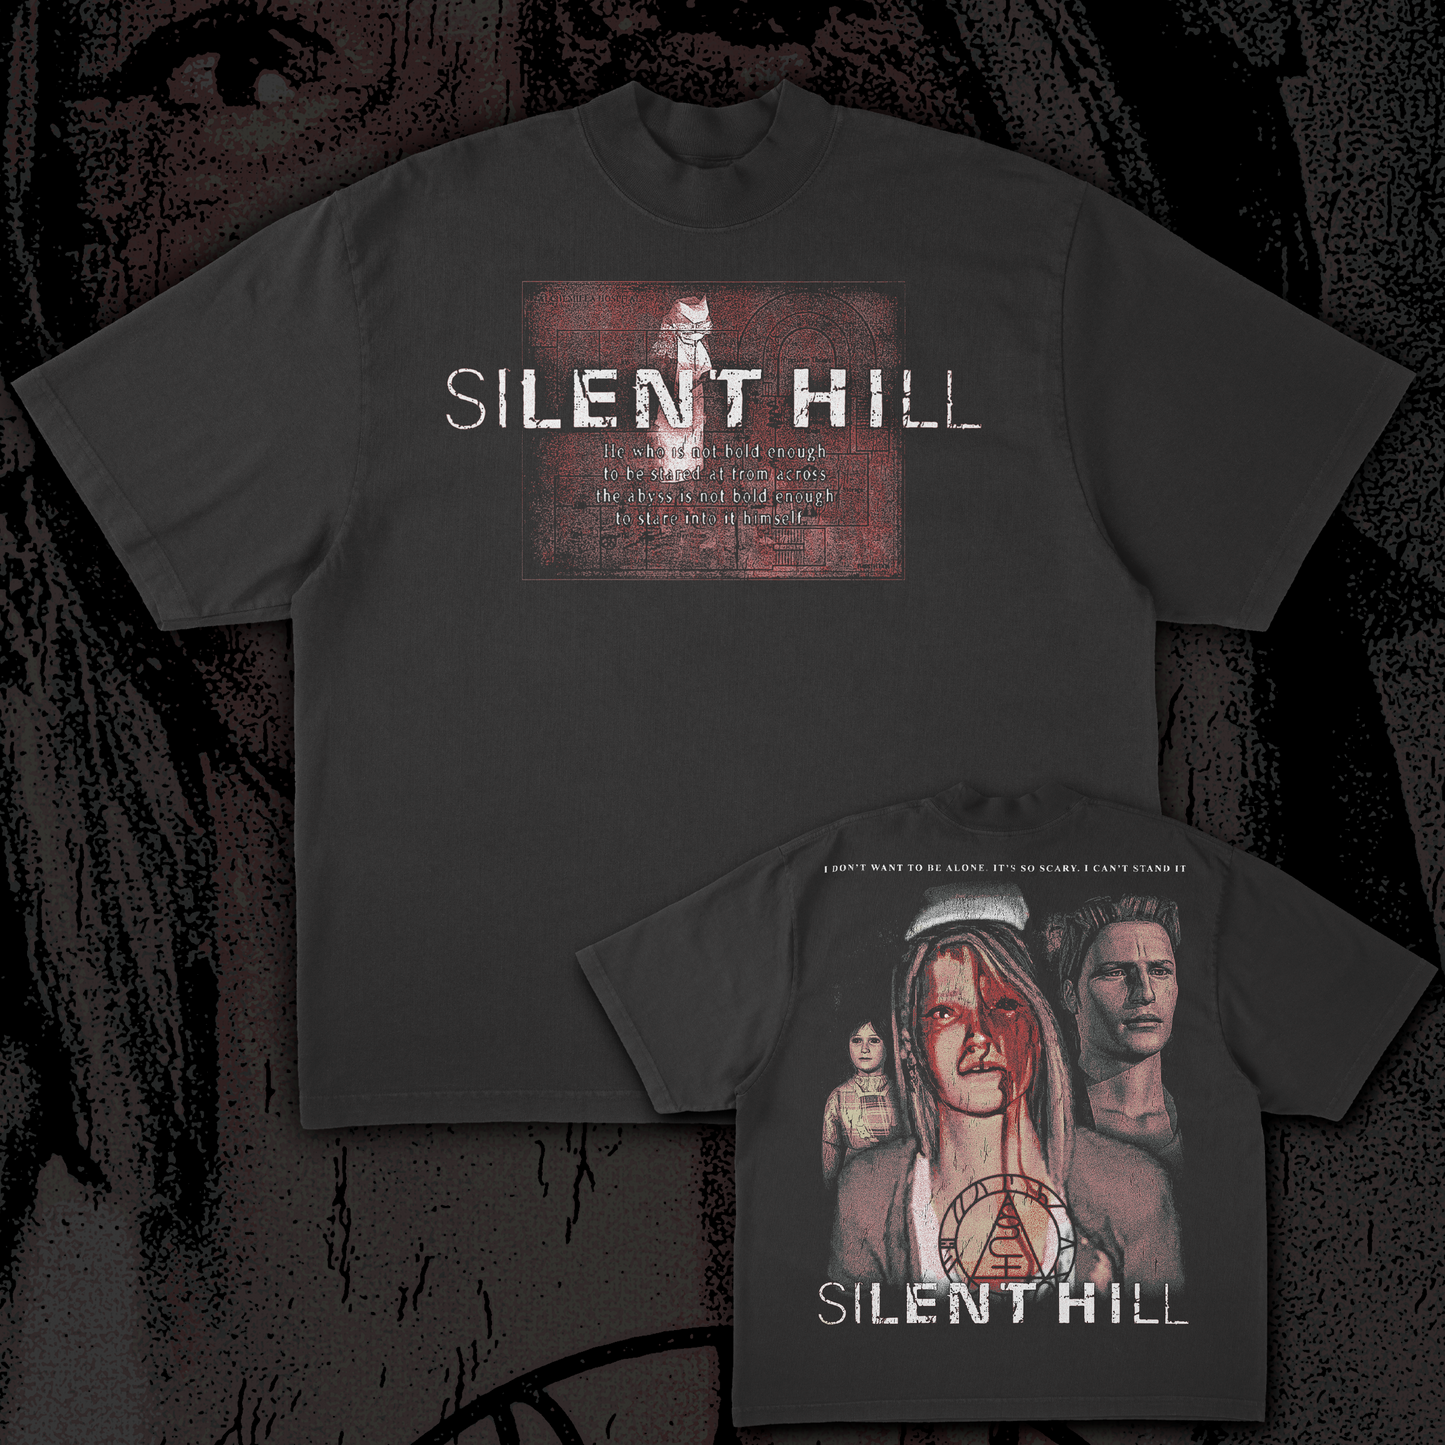 Silent Hill - I don't want to be alone